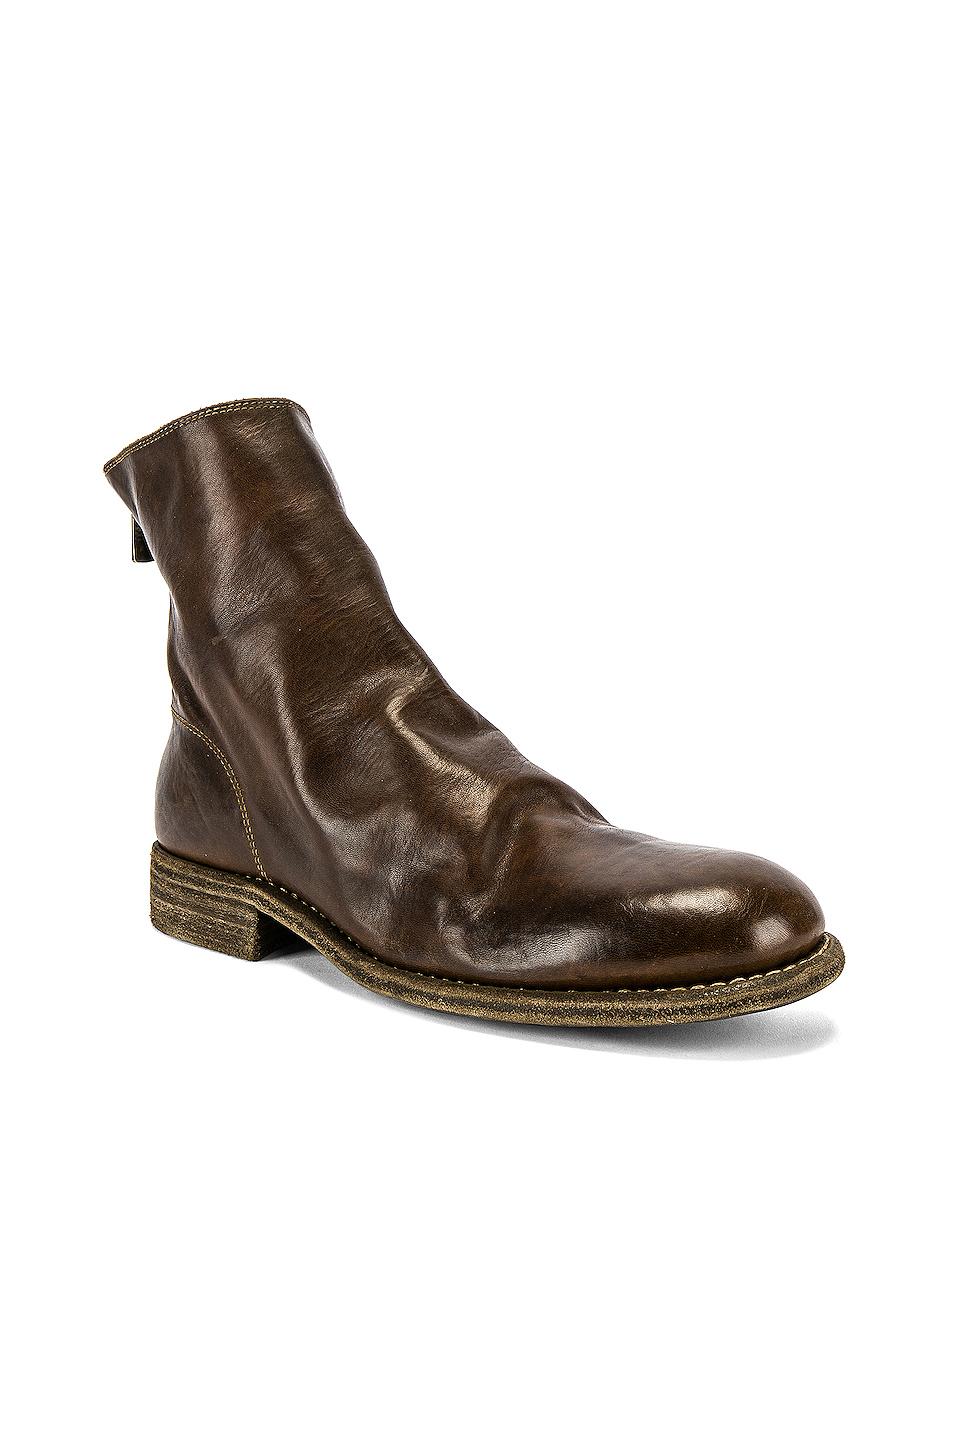 Guidi Back Zip Boot in Brown for Men - Lyst